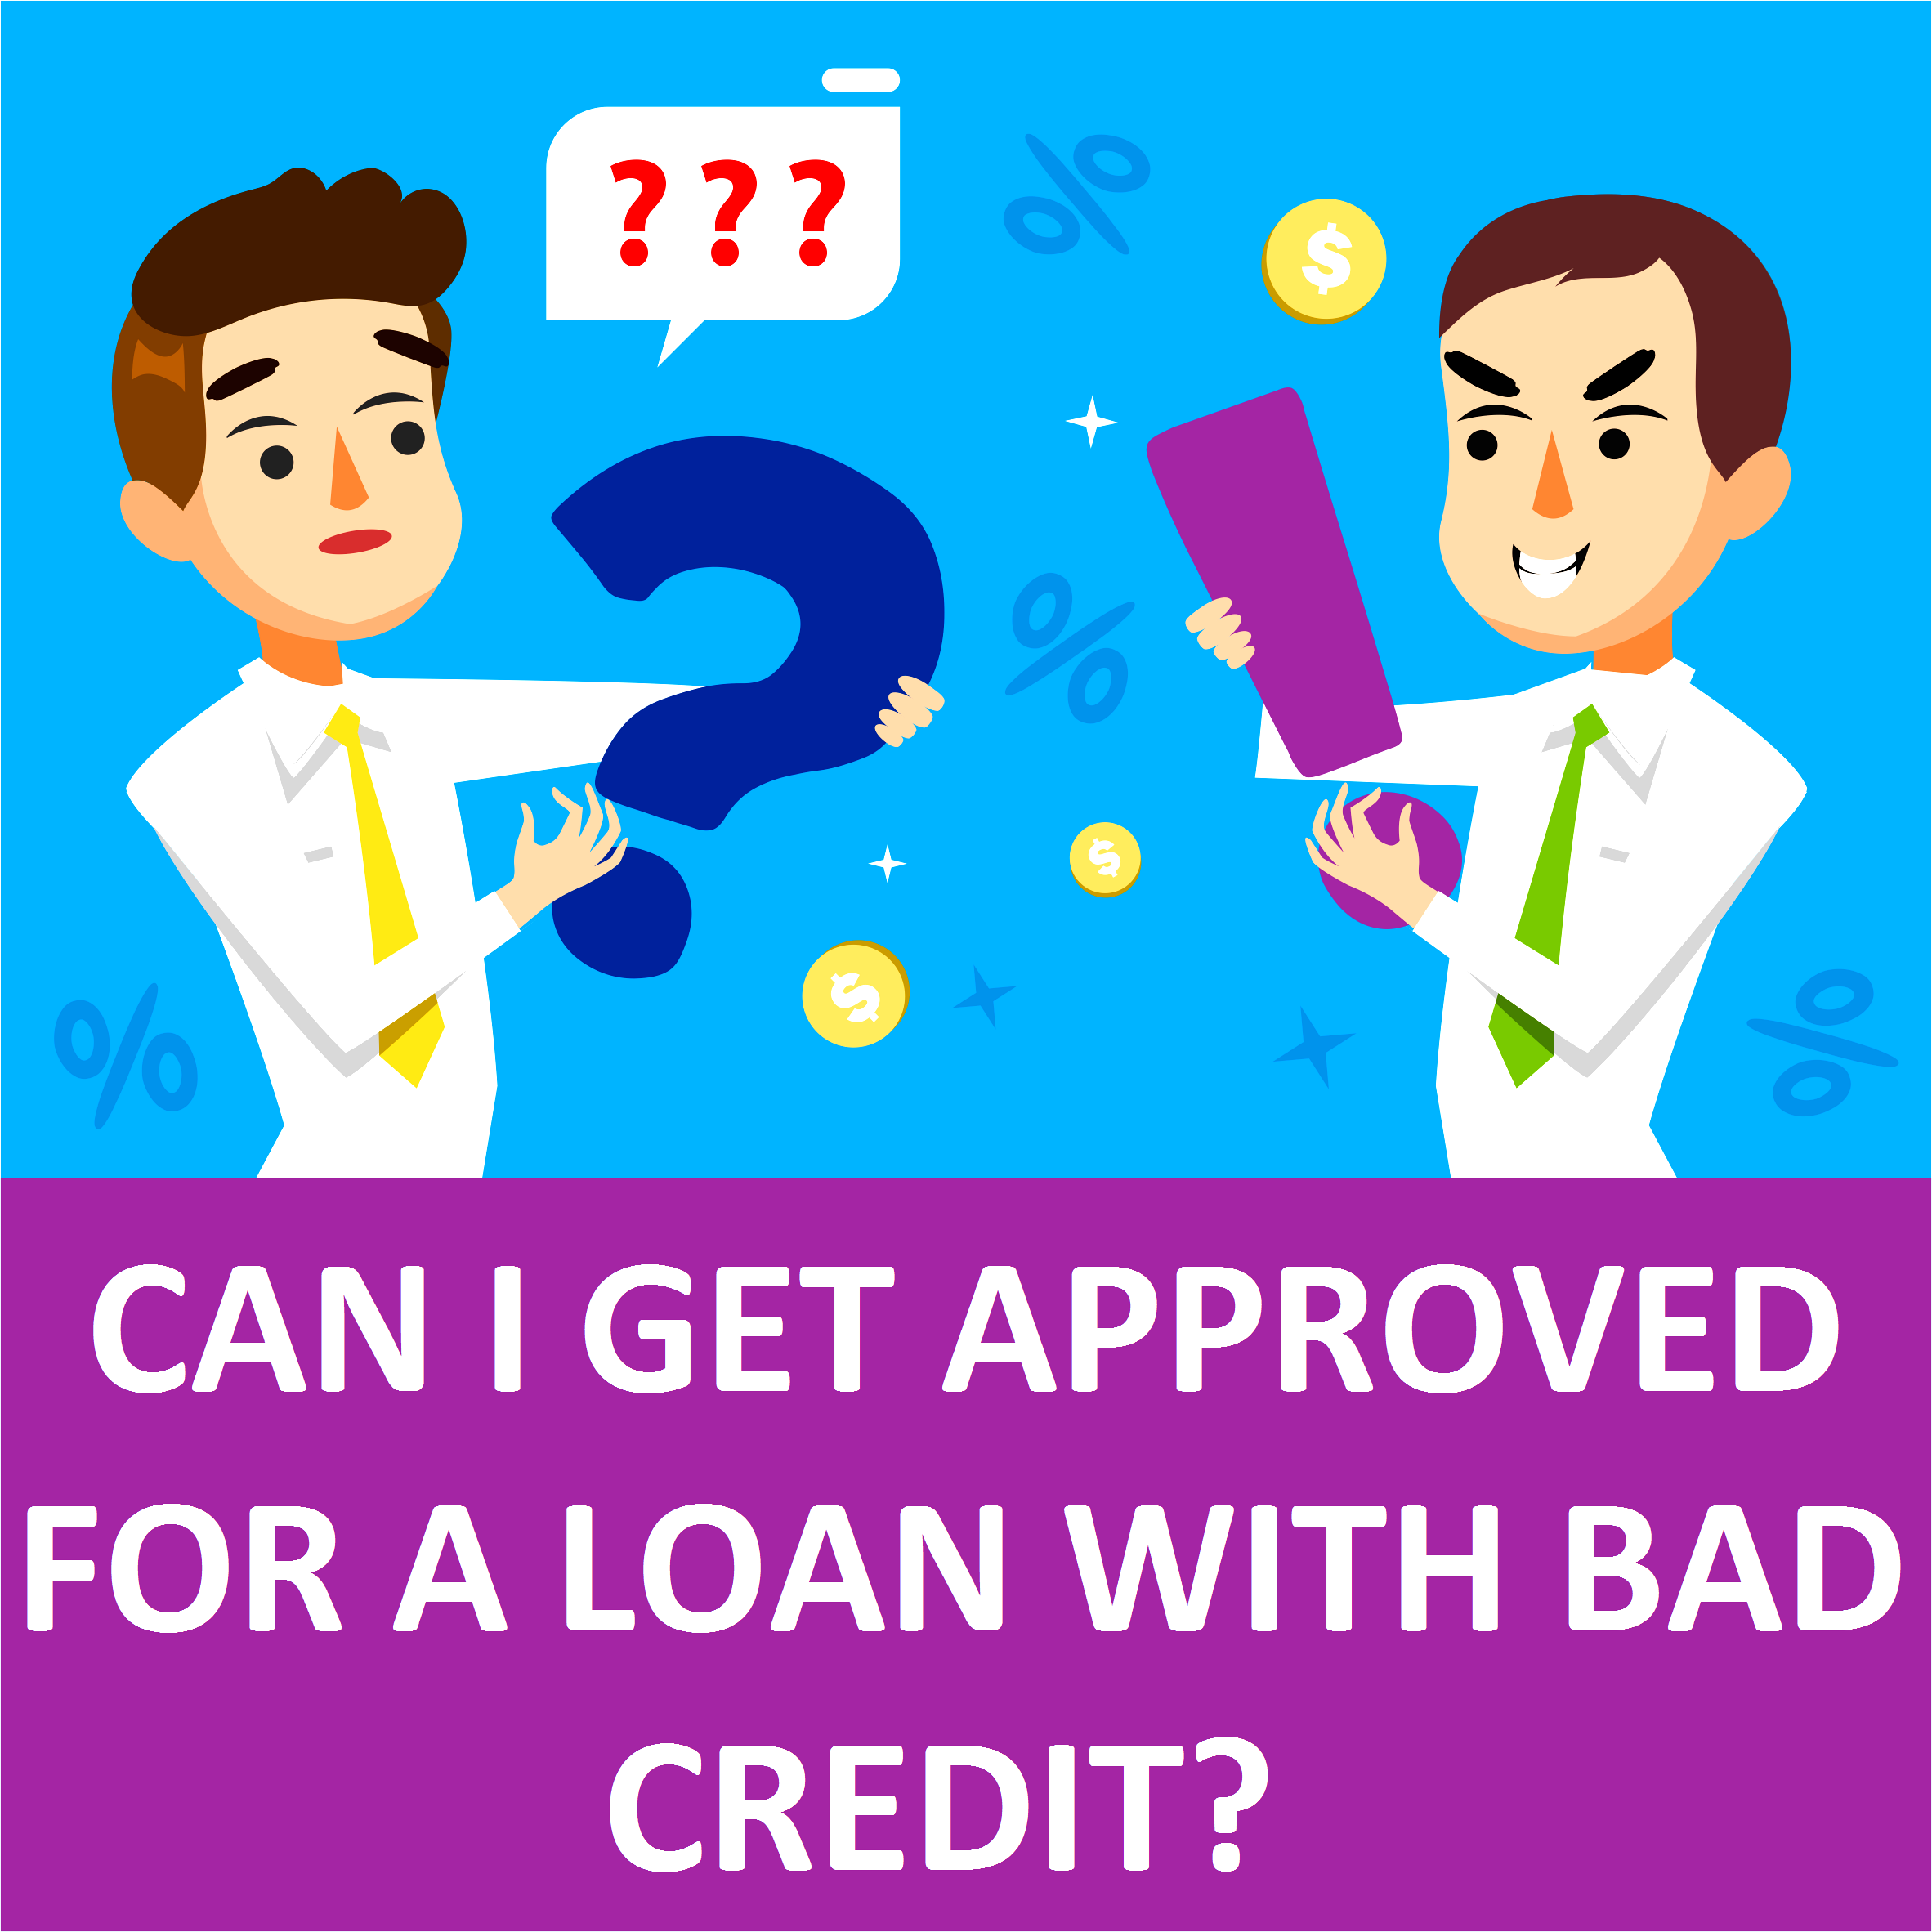 Can I Get Approved For A Loan With Bad Credit?